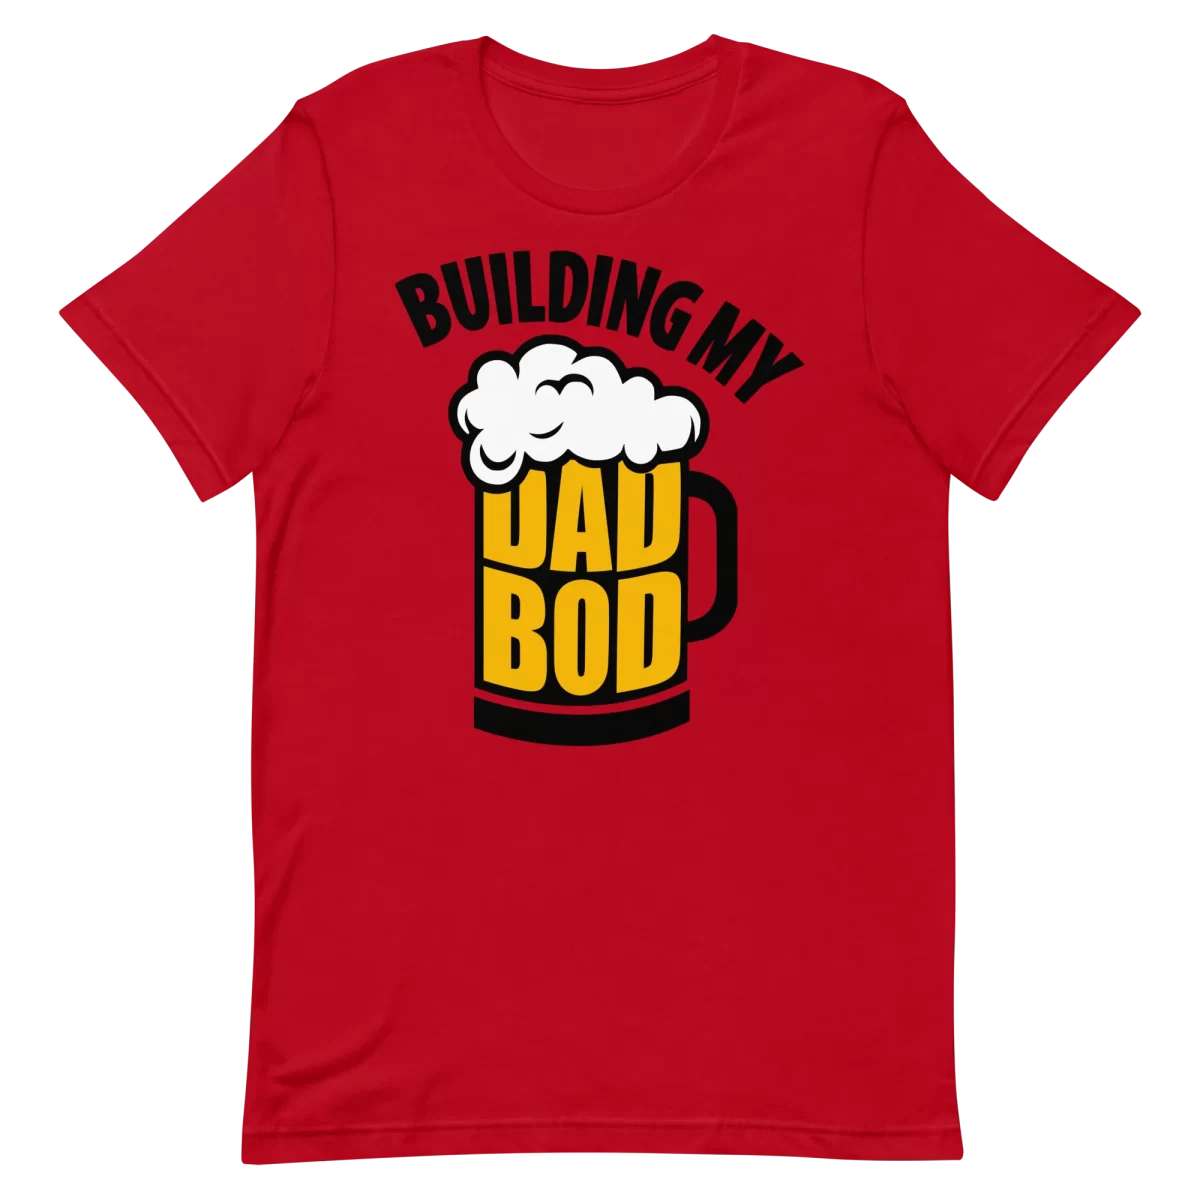 Unisex T-Shirt - Building My Dad Bod - Red